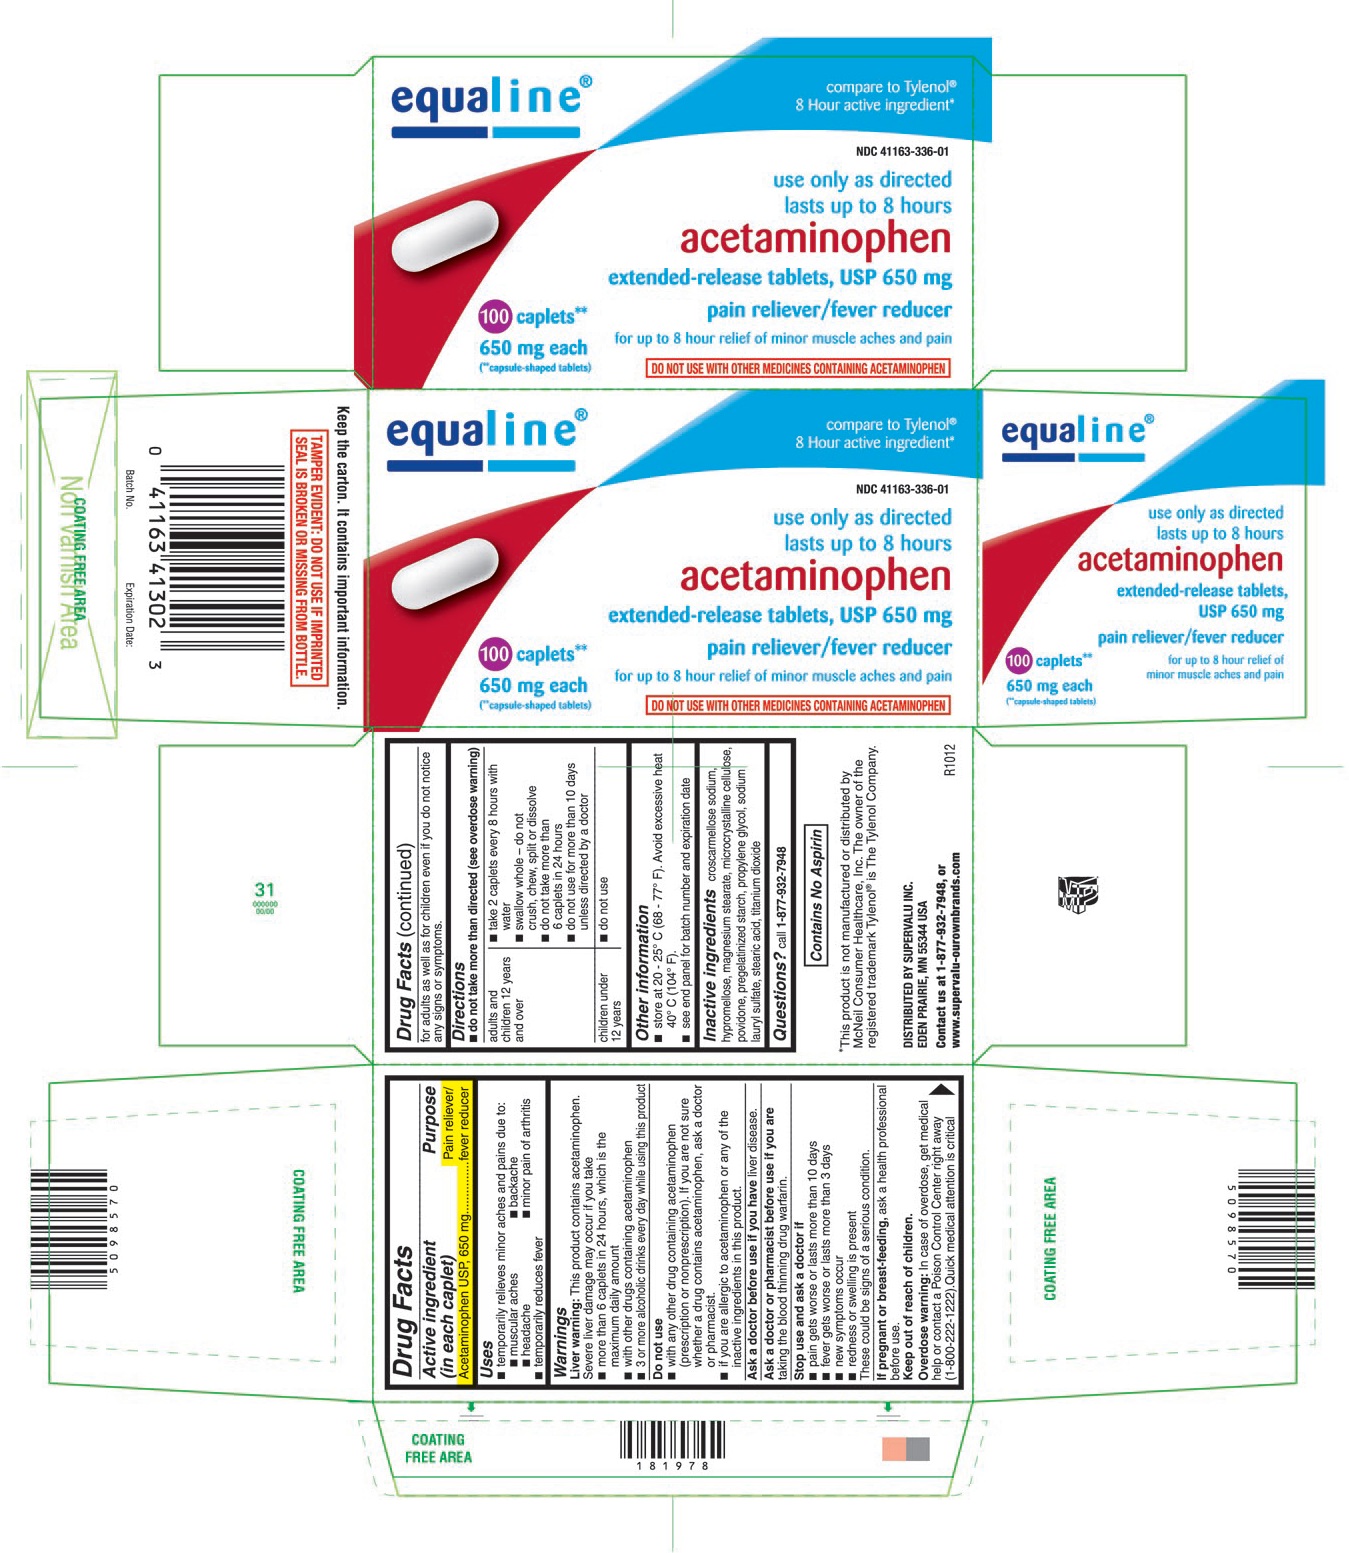 This is the 100 count bottle carton label for Equaline acetaminophen (8 hour) extended-release tablets, USP 650 mg.